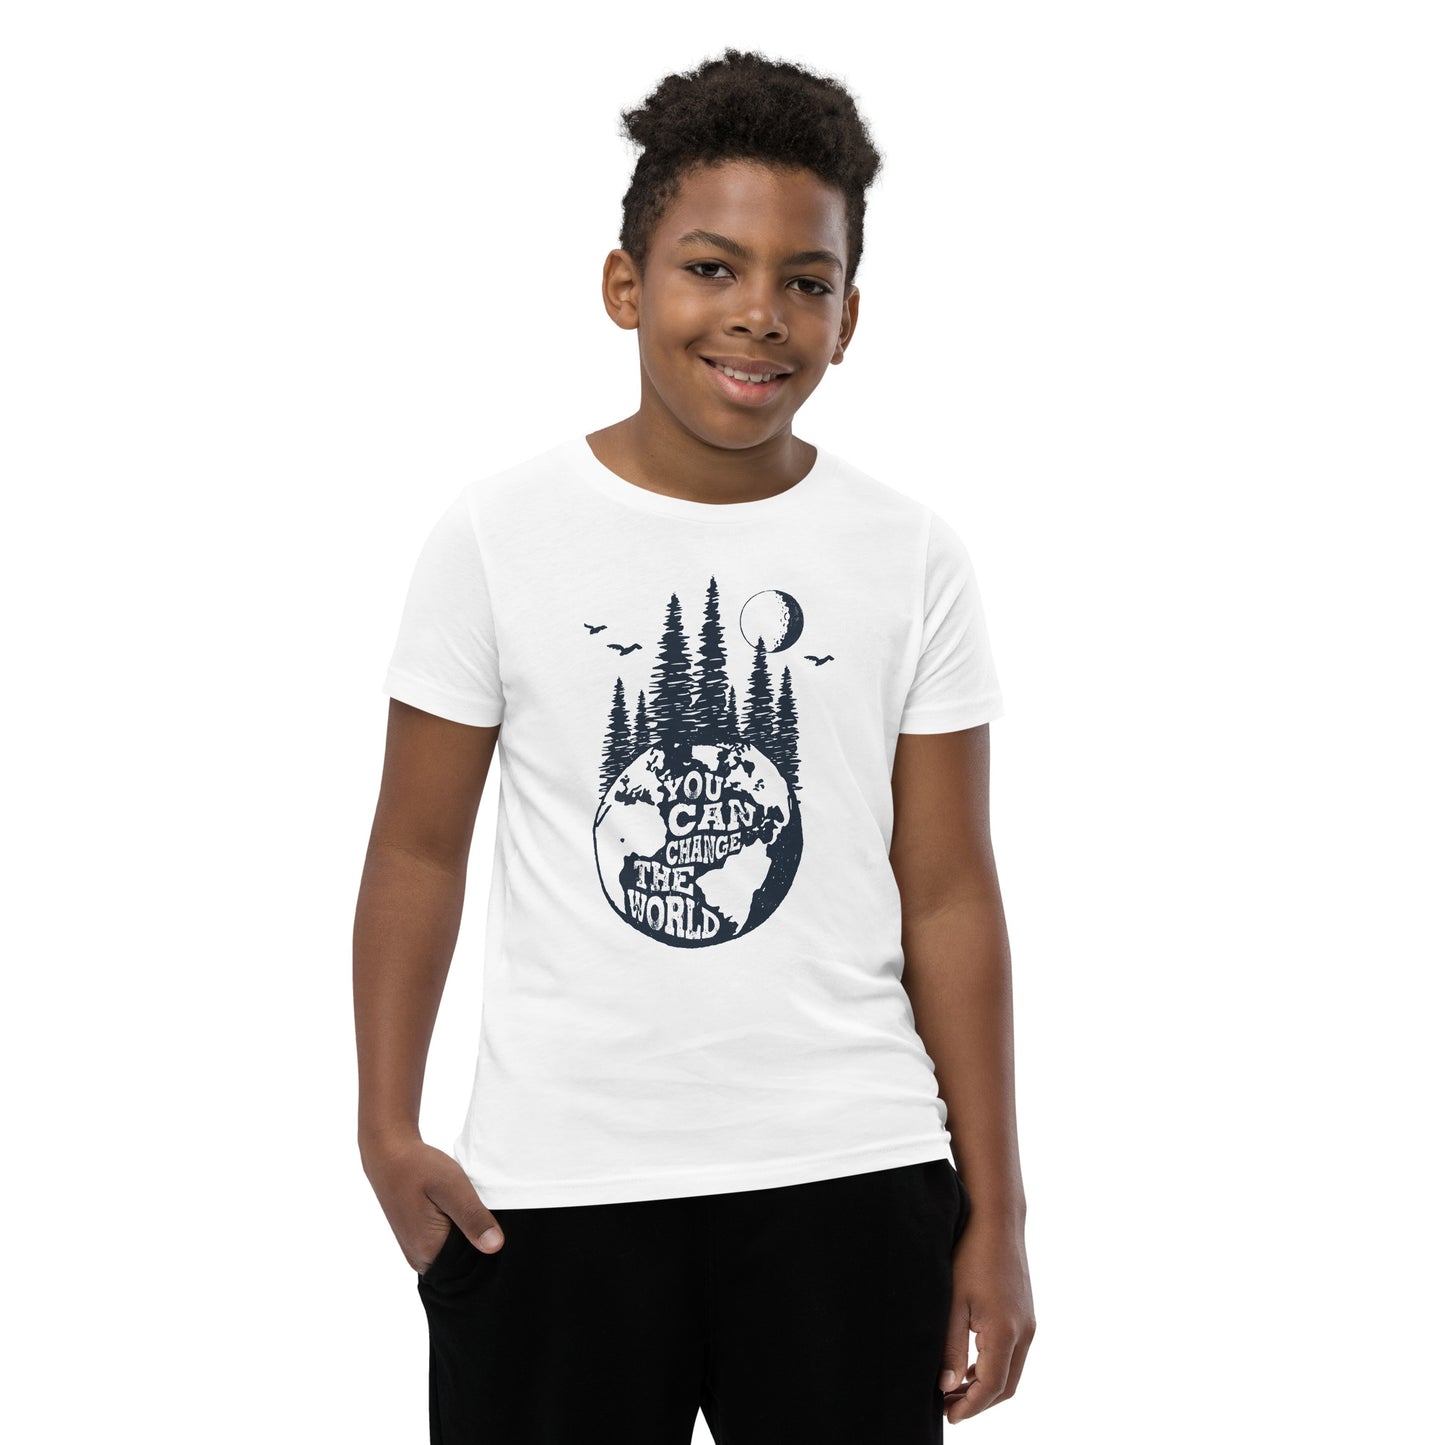 "You Can Change The World" Youth T-Shirt